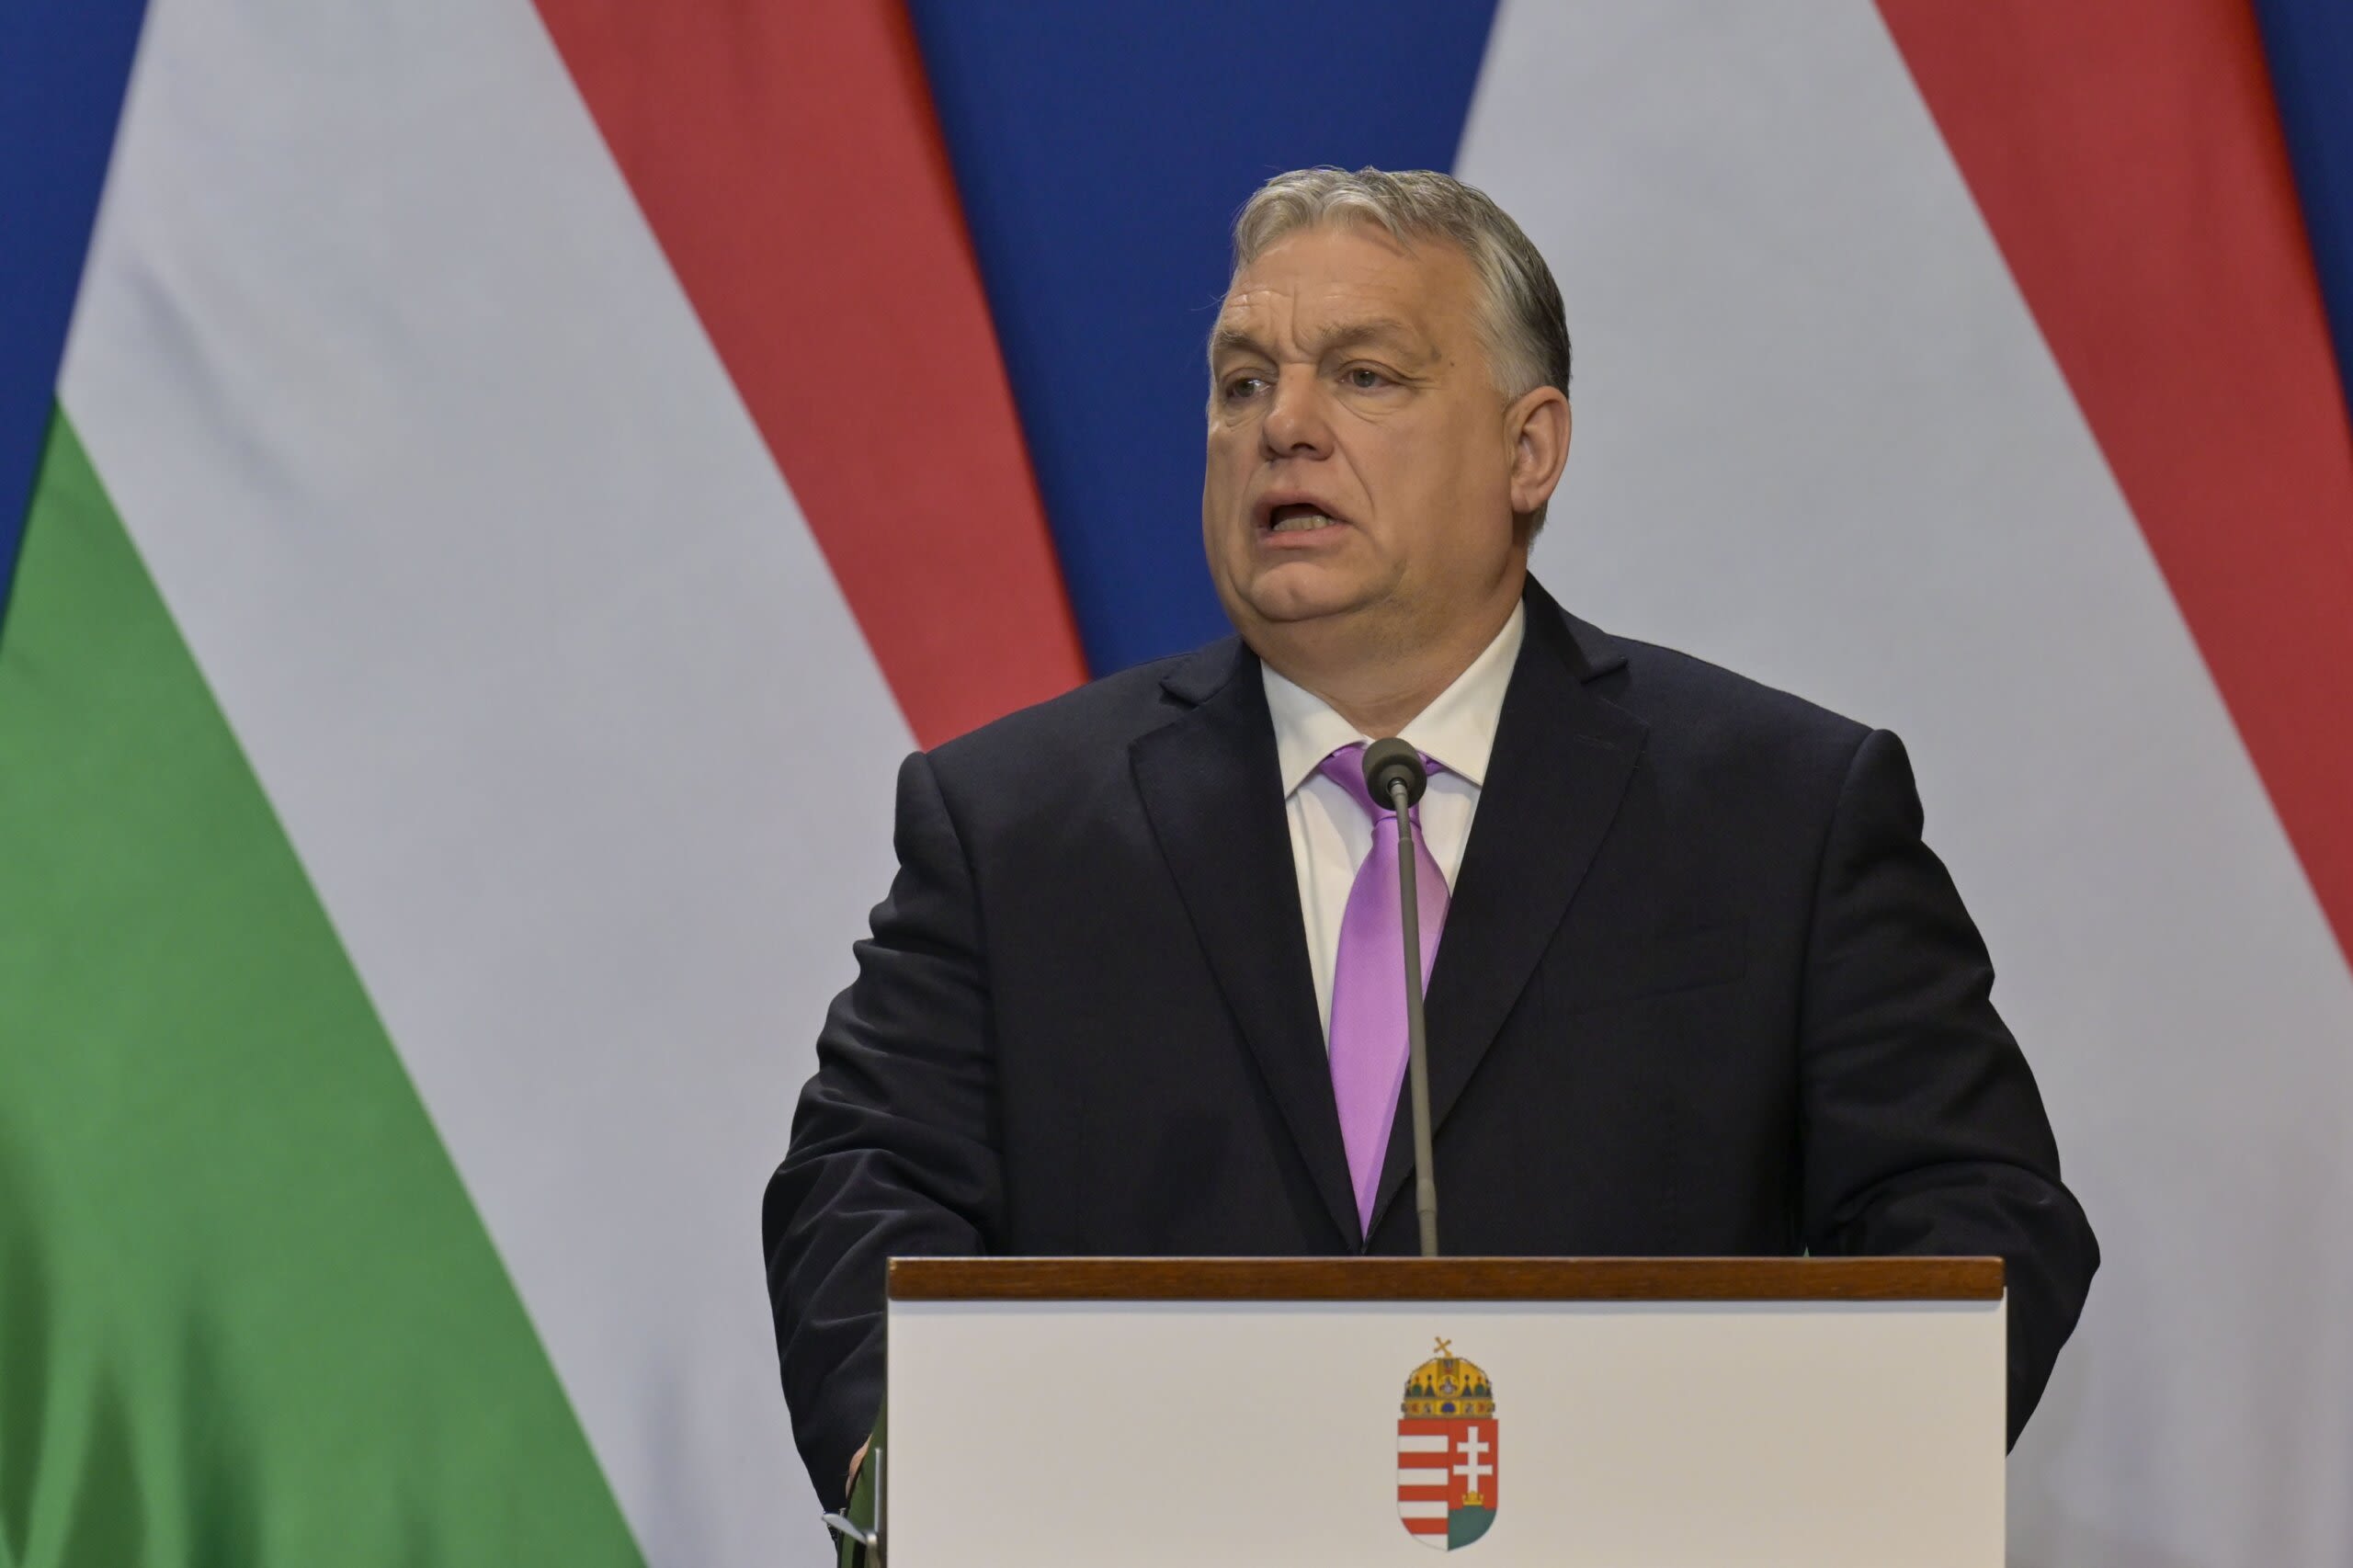 Hungary will seek to opt out of NATO efforts to support Ukraine, Orbán says - WTOP News